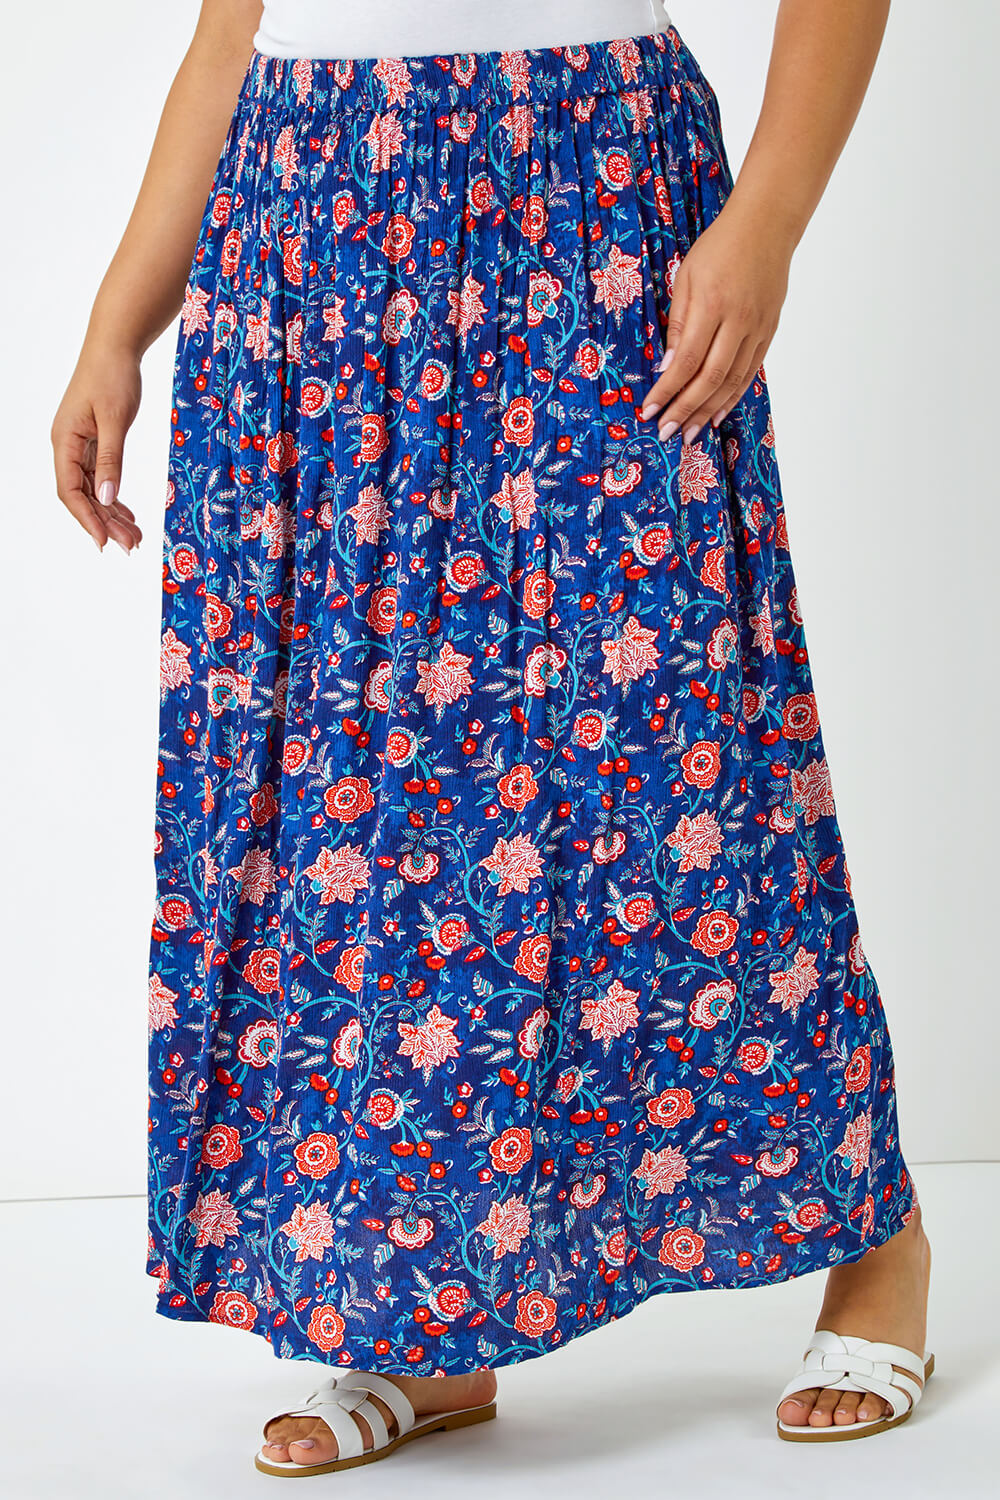 Blue Curve Floral Print Maxi Skirt, Image 4 of 5